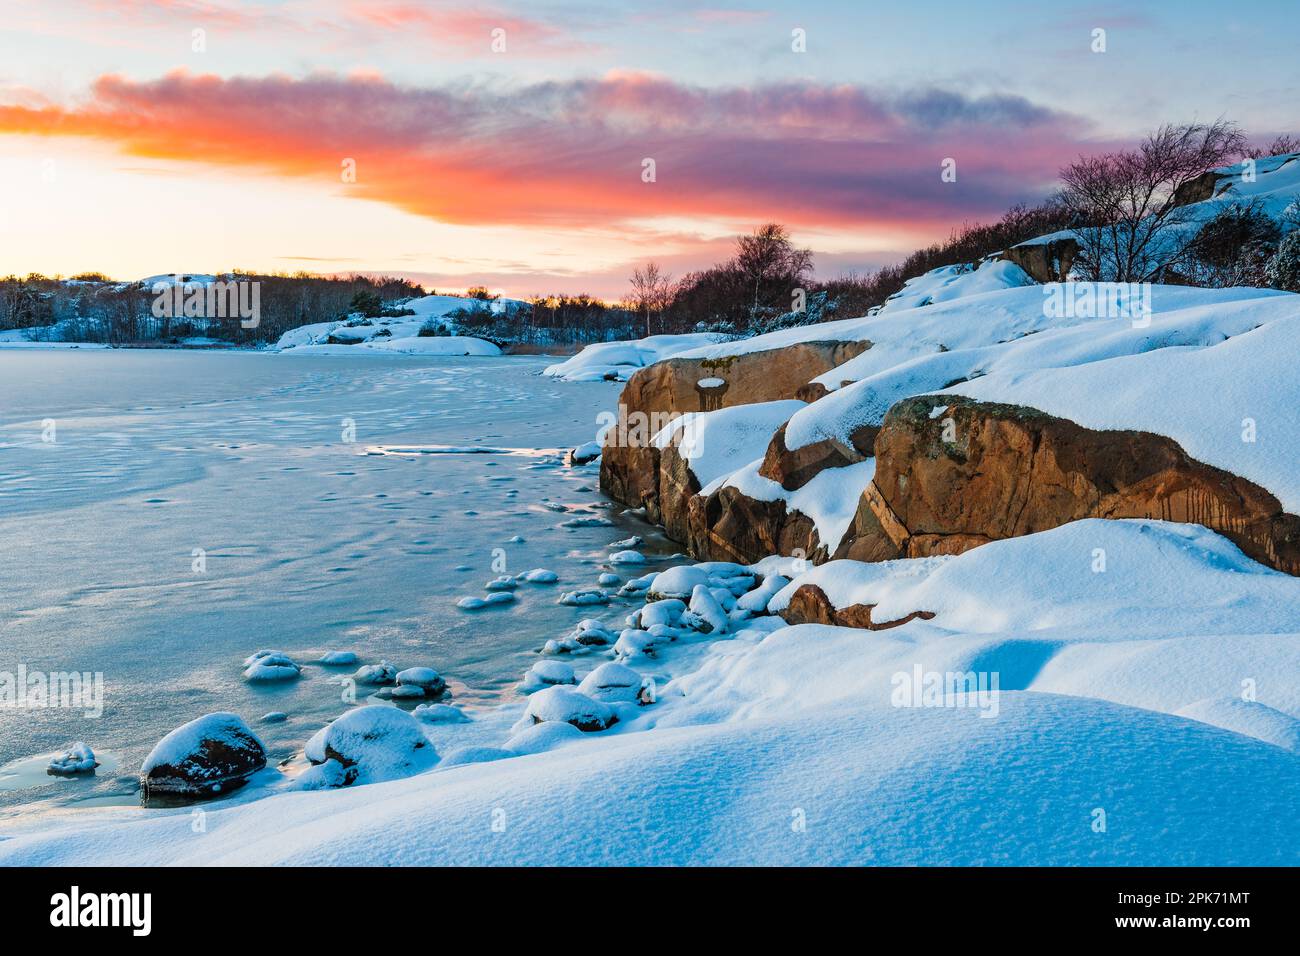 A stunning winter wonderland of frozen sea, snow-capped land and an icy sky at sunset; a breathtaking reminder of the beauty in nature. Stock Photo